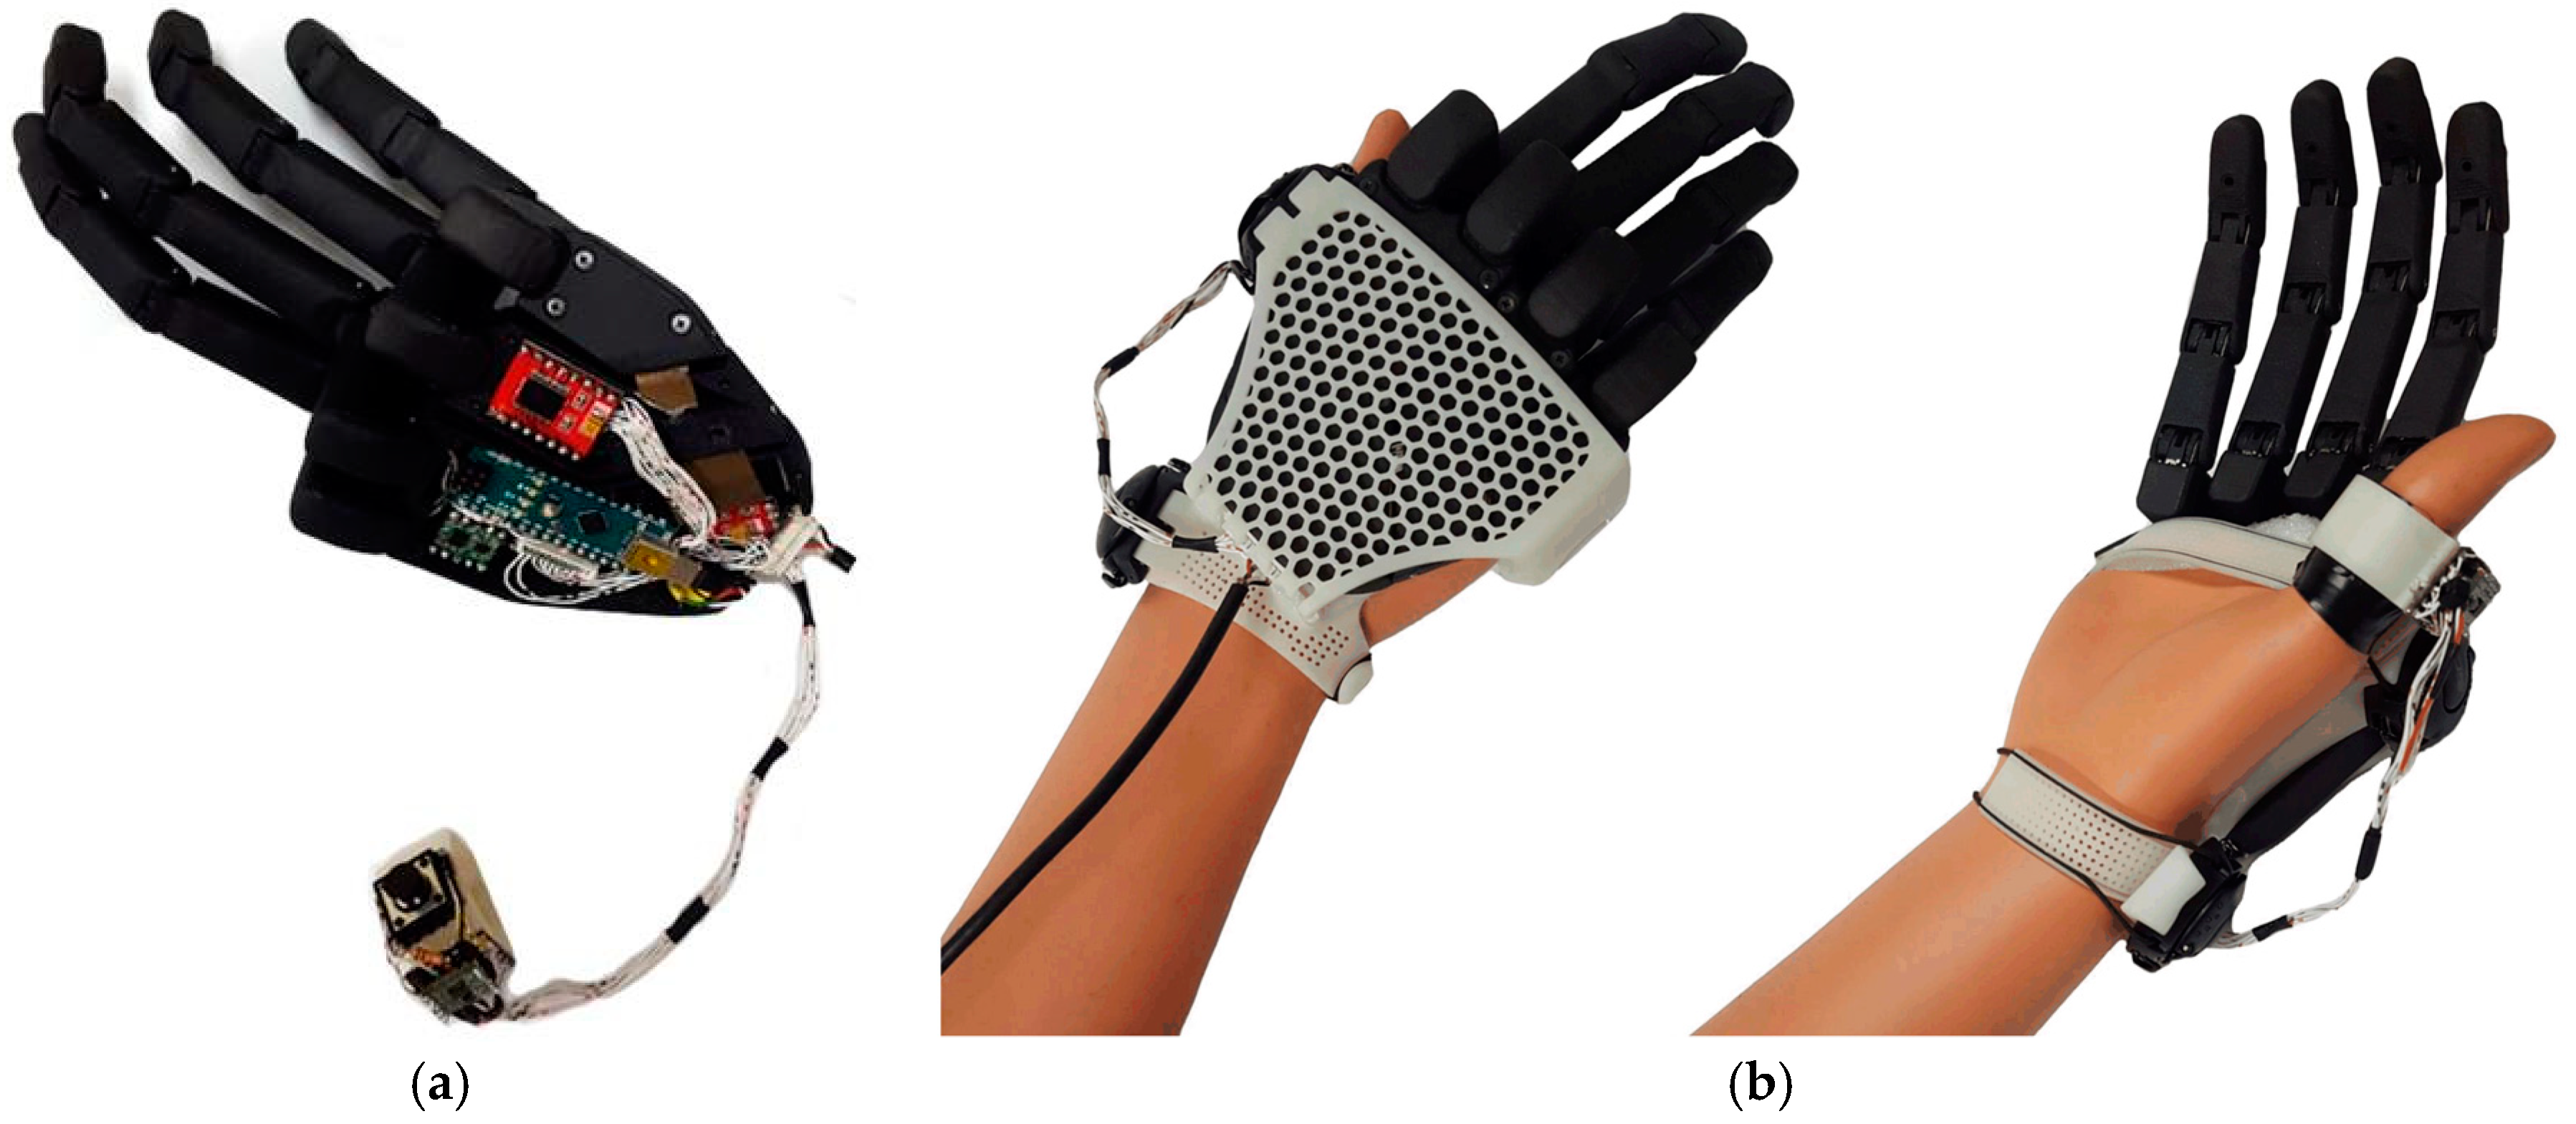 Applied Sciences | Free Full-Text | Development of a Lightweight Prosthetic  Hand for Patients with Amputated Fingers